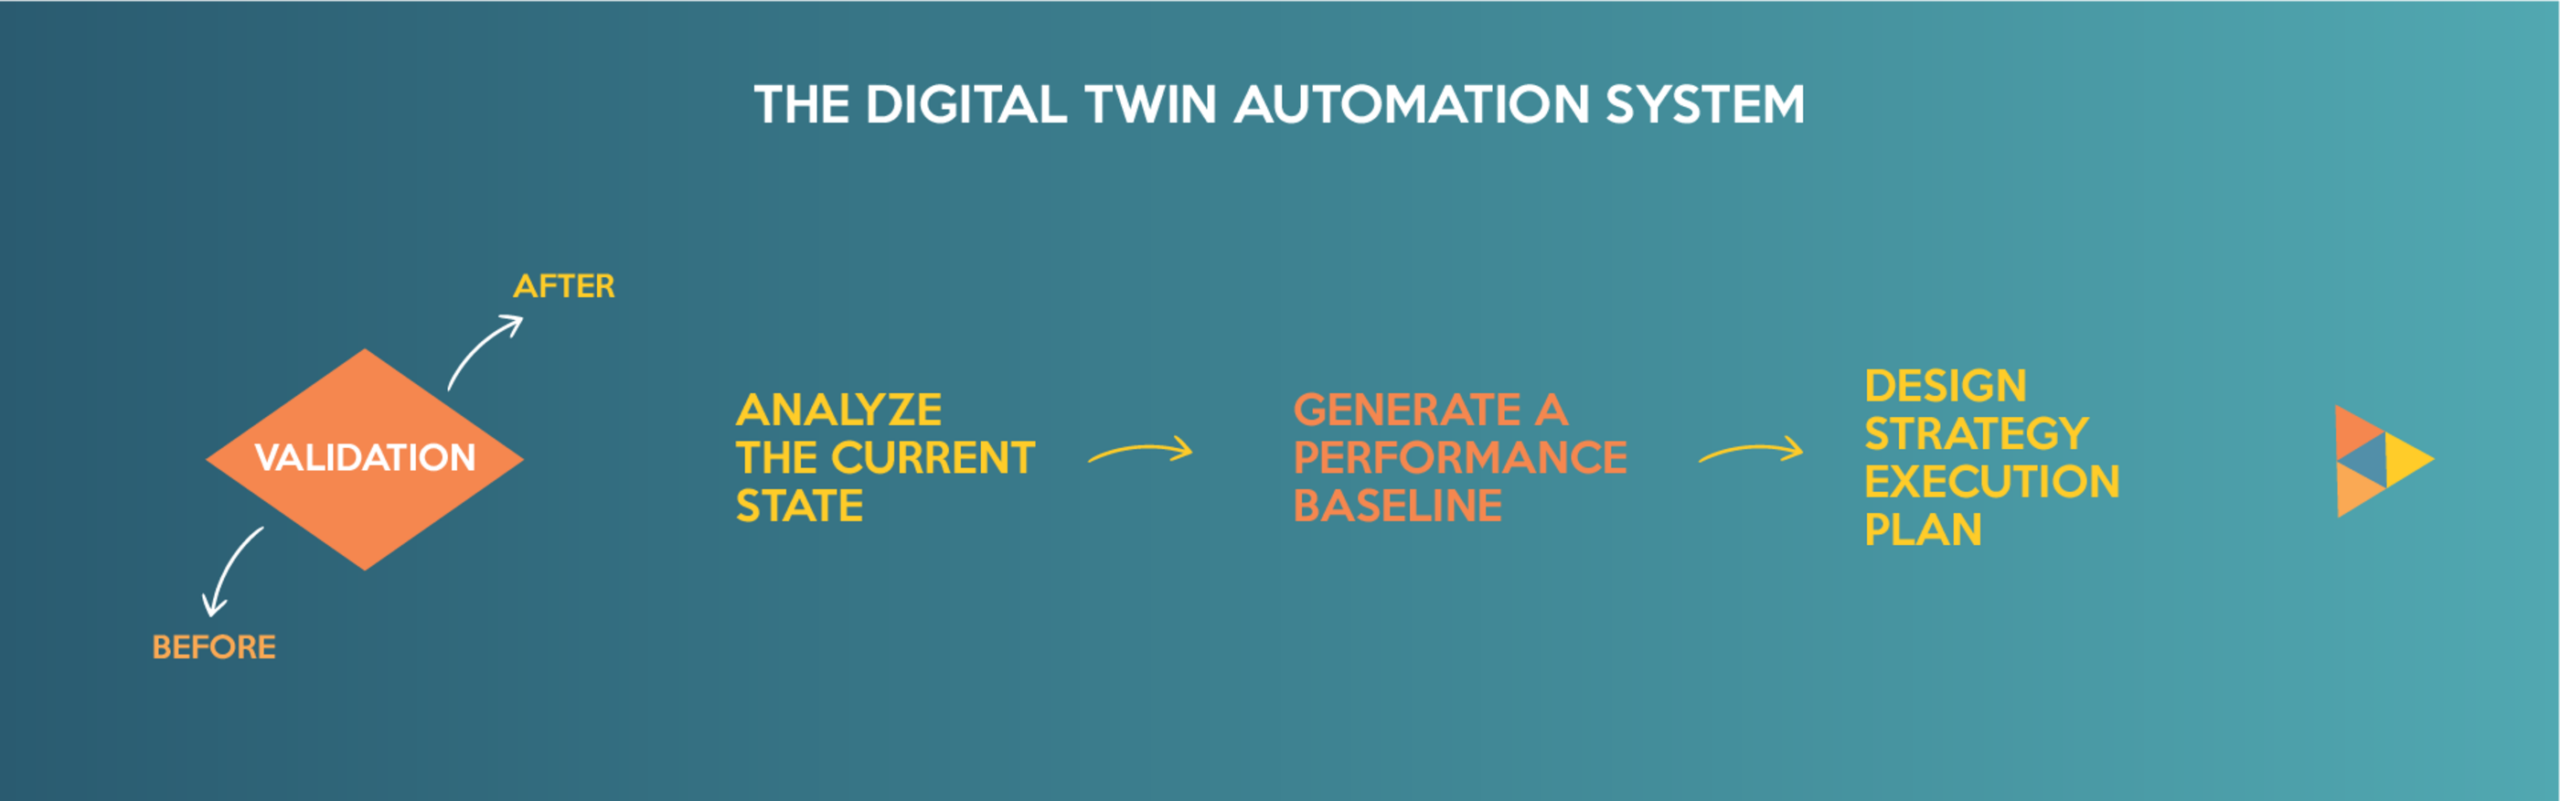 Infografico Digital Twin Automation System 2 1